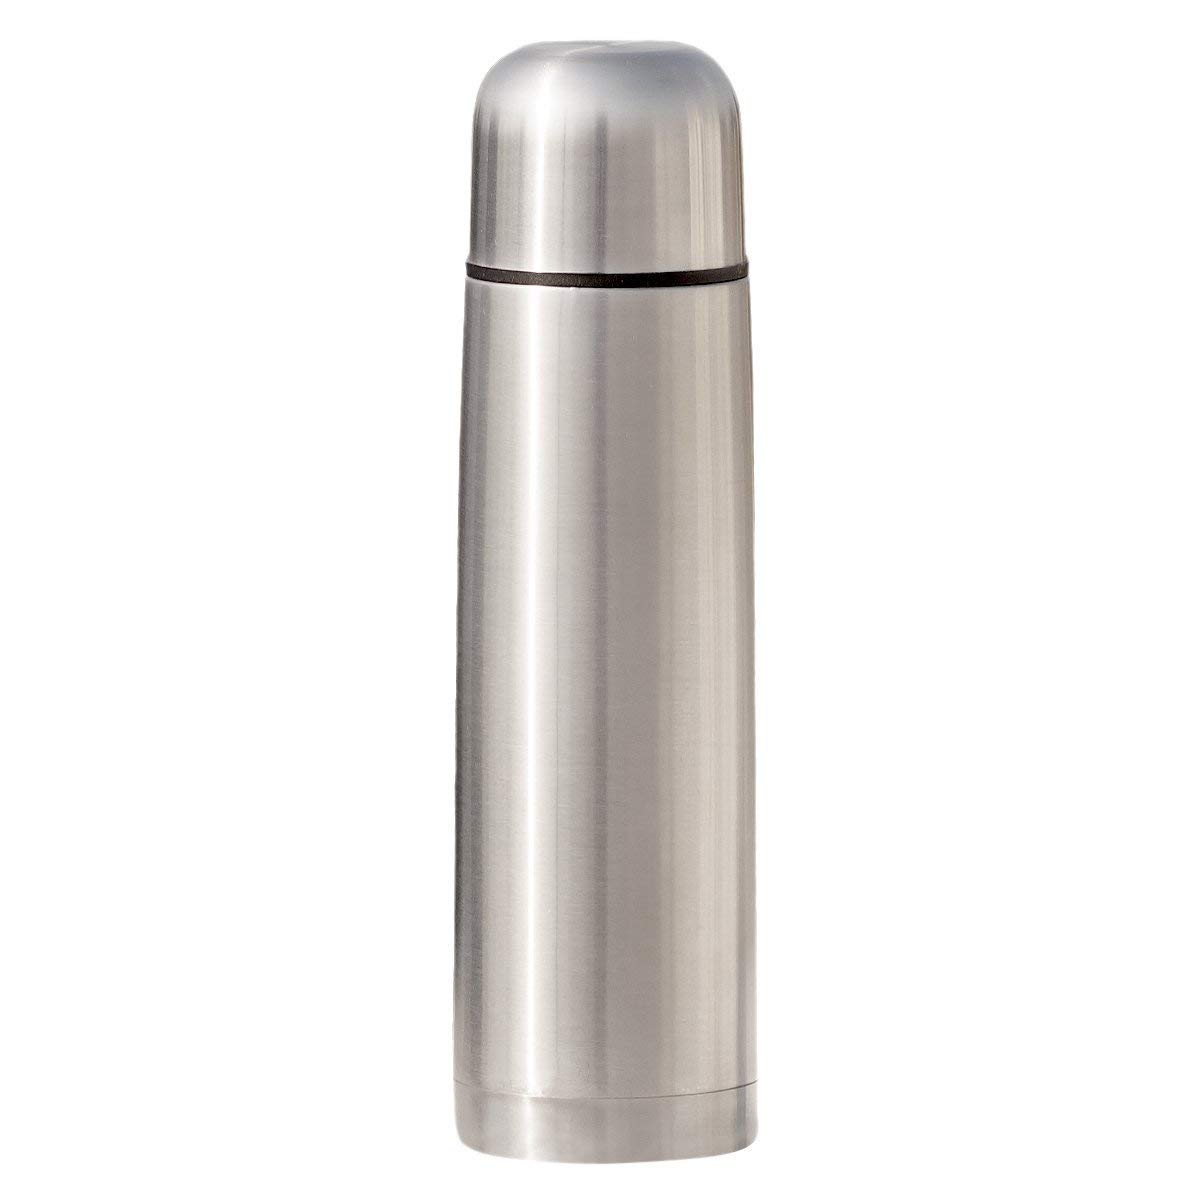 Stainless Steel Water Bottle Vacuum Insulated Flask Thermal Sport Gym Drinks Cup 